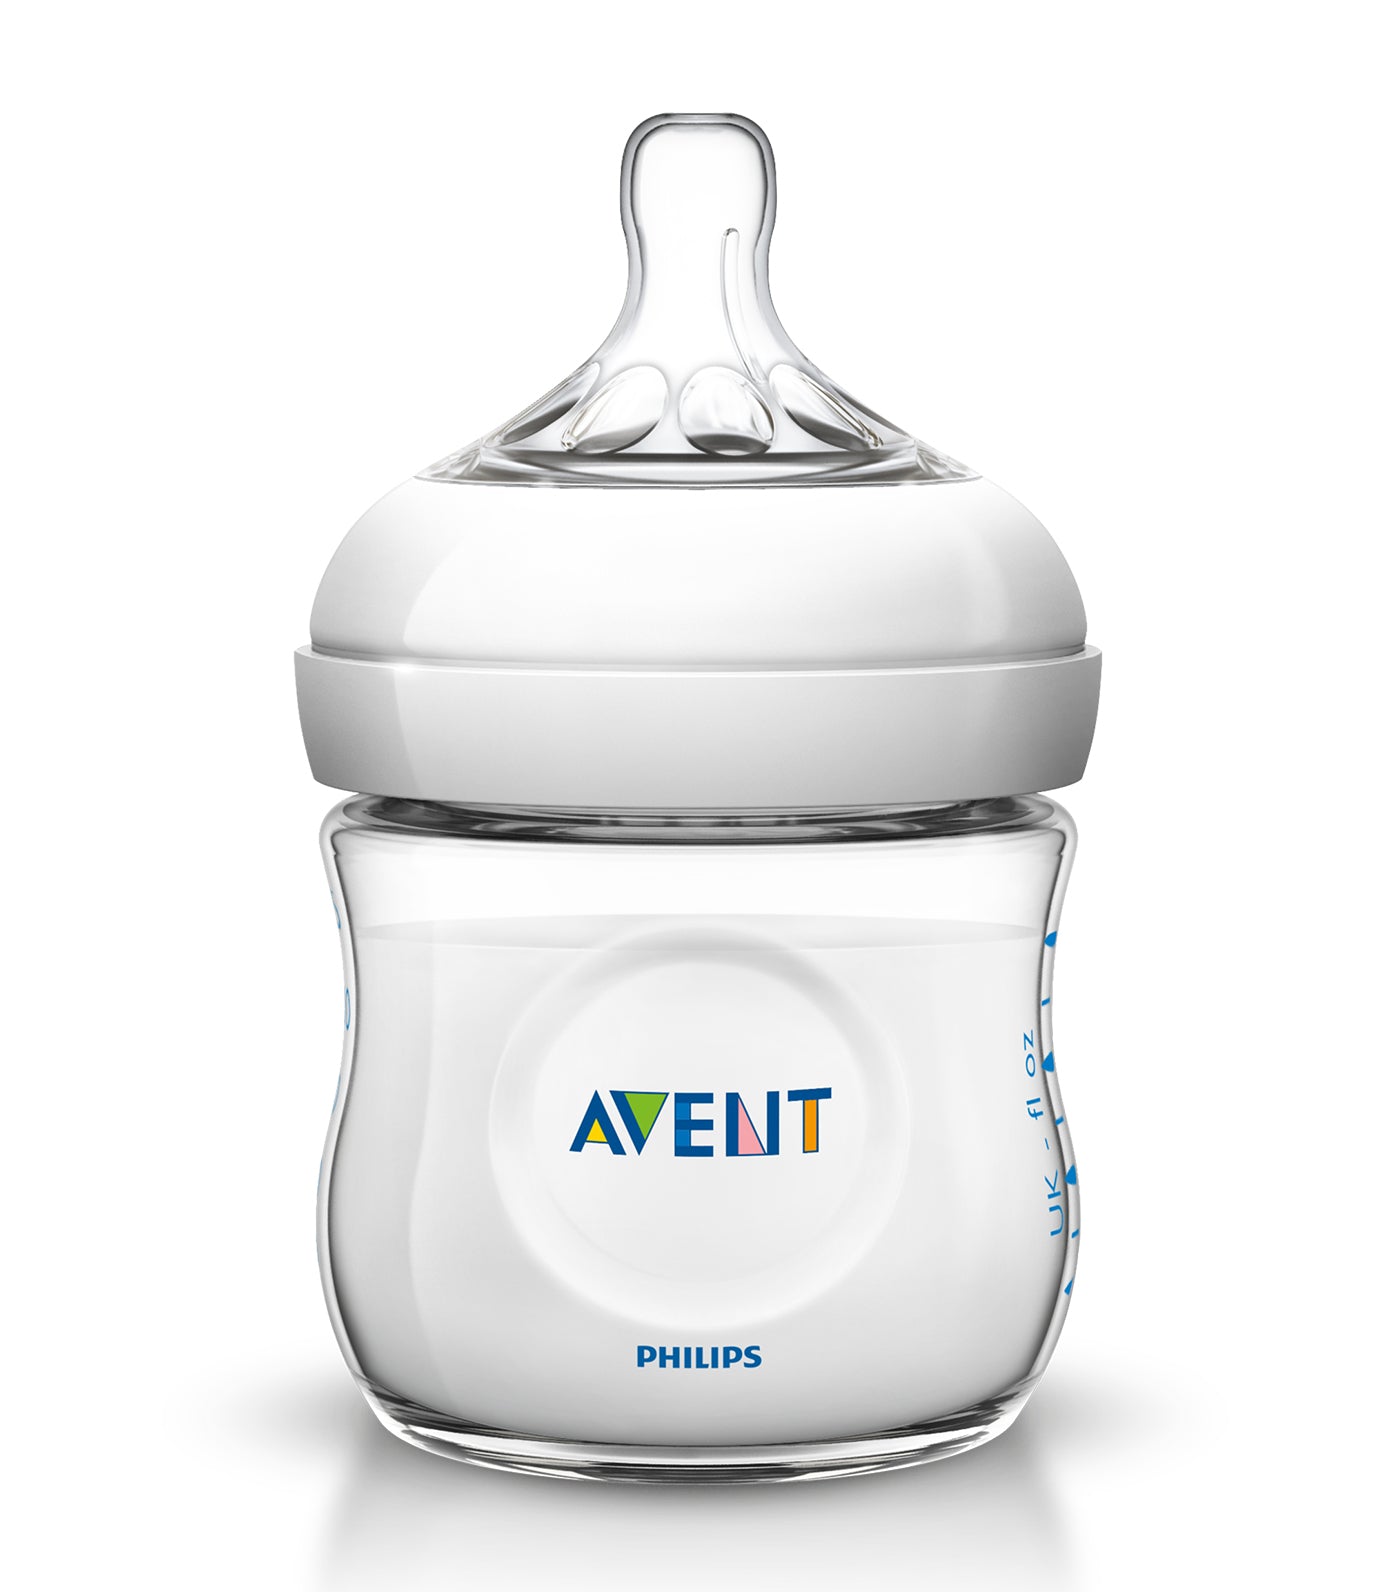 Philips AVENT Natural 2.0 Gift Set, Pink